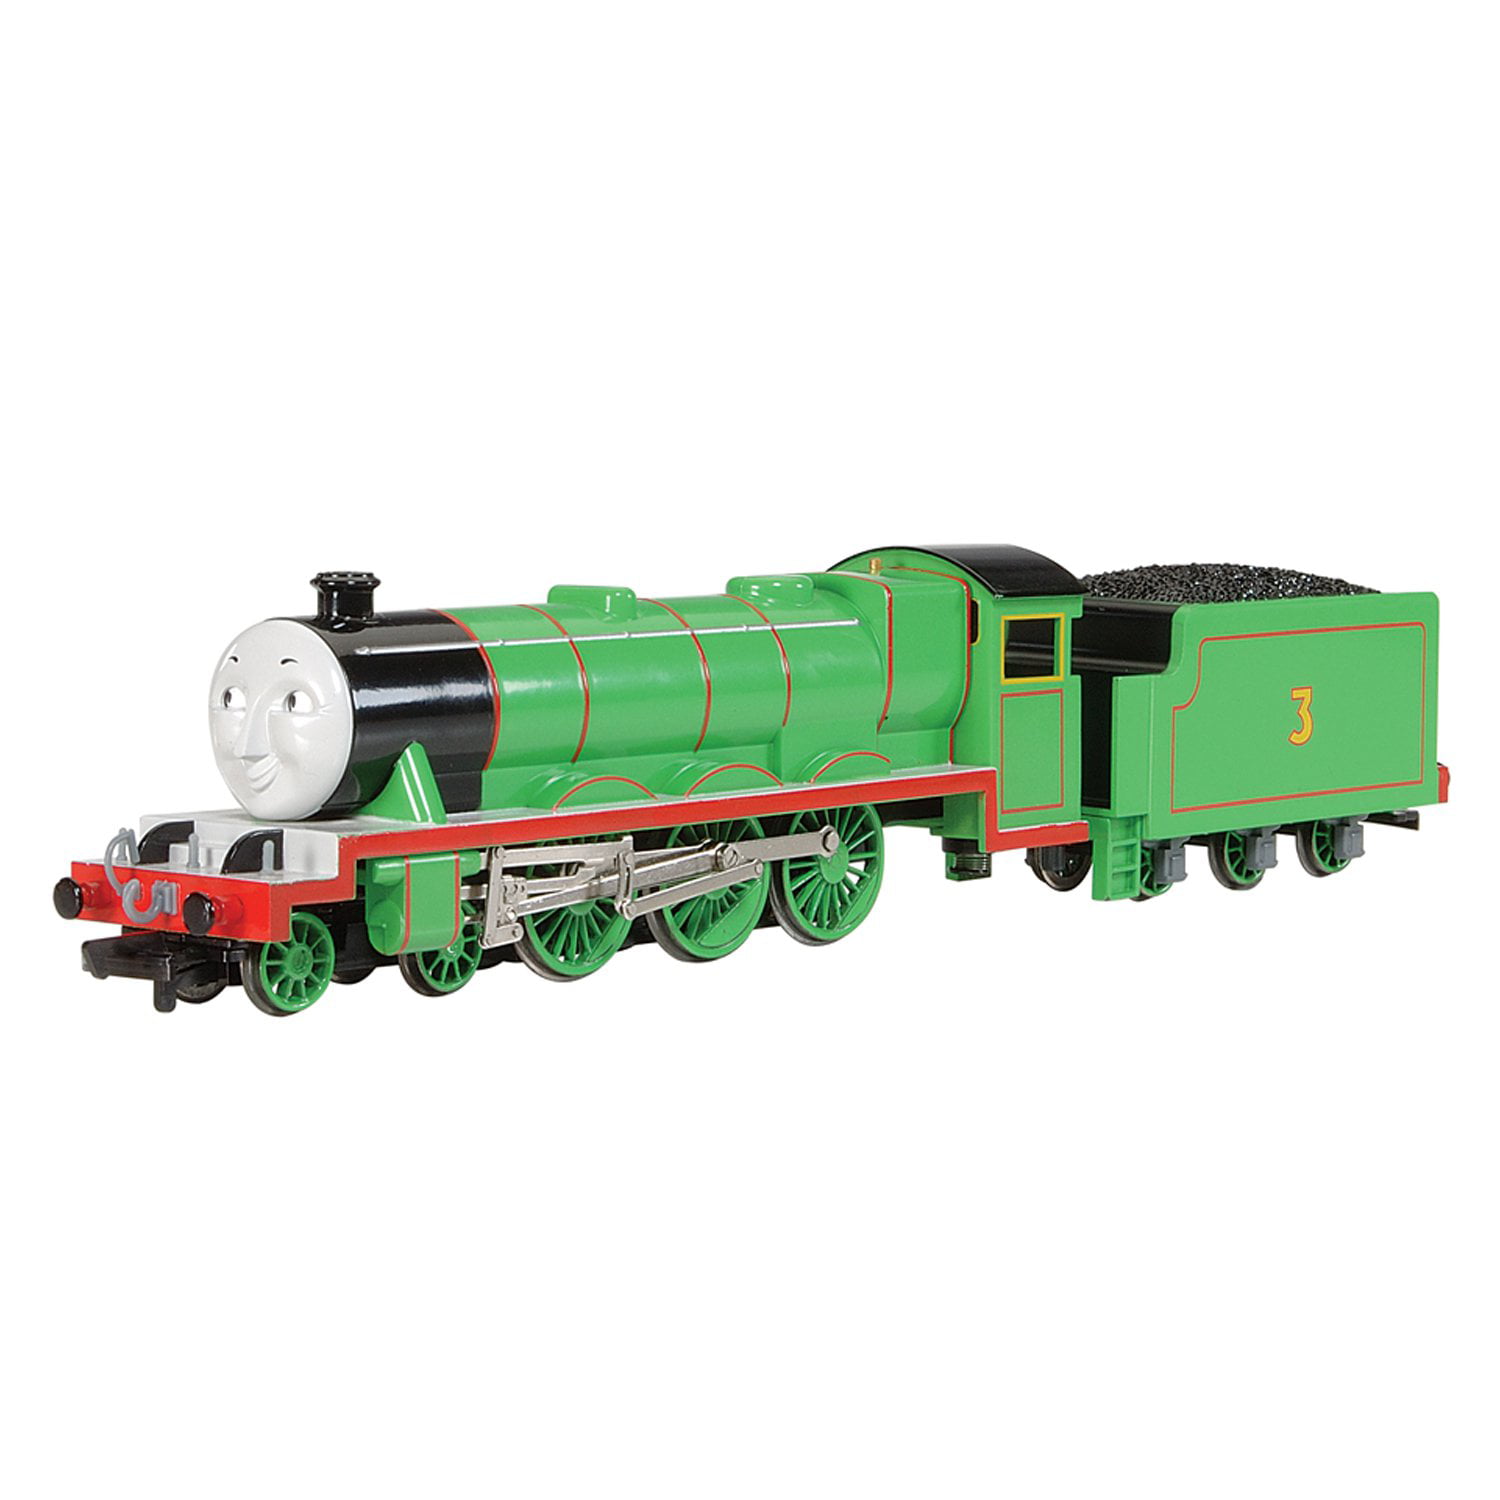 Bachmann Trains Thomas and Friends Henry the Green Engine Toy + Track Pack + DVD